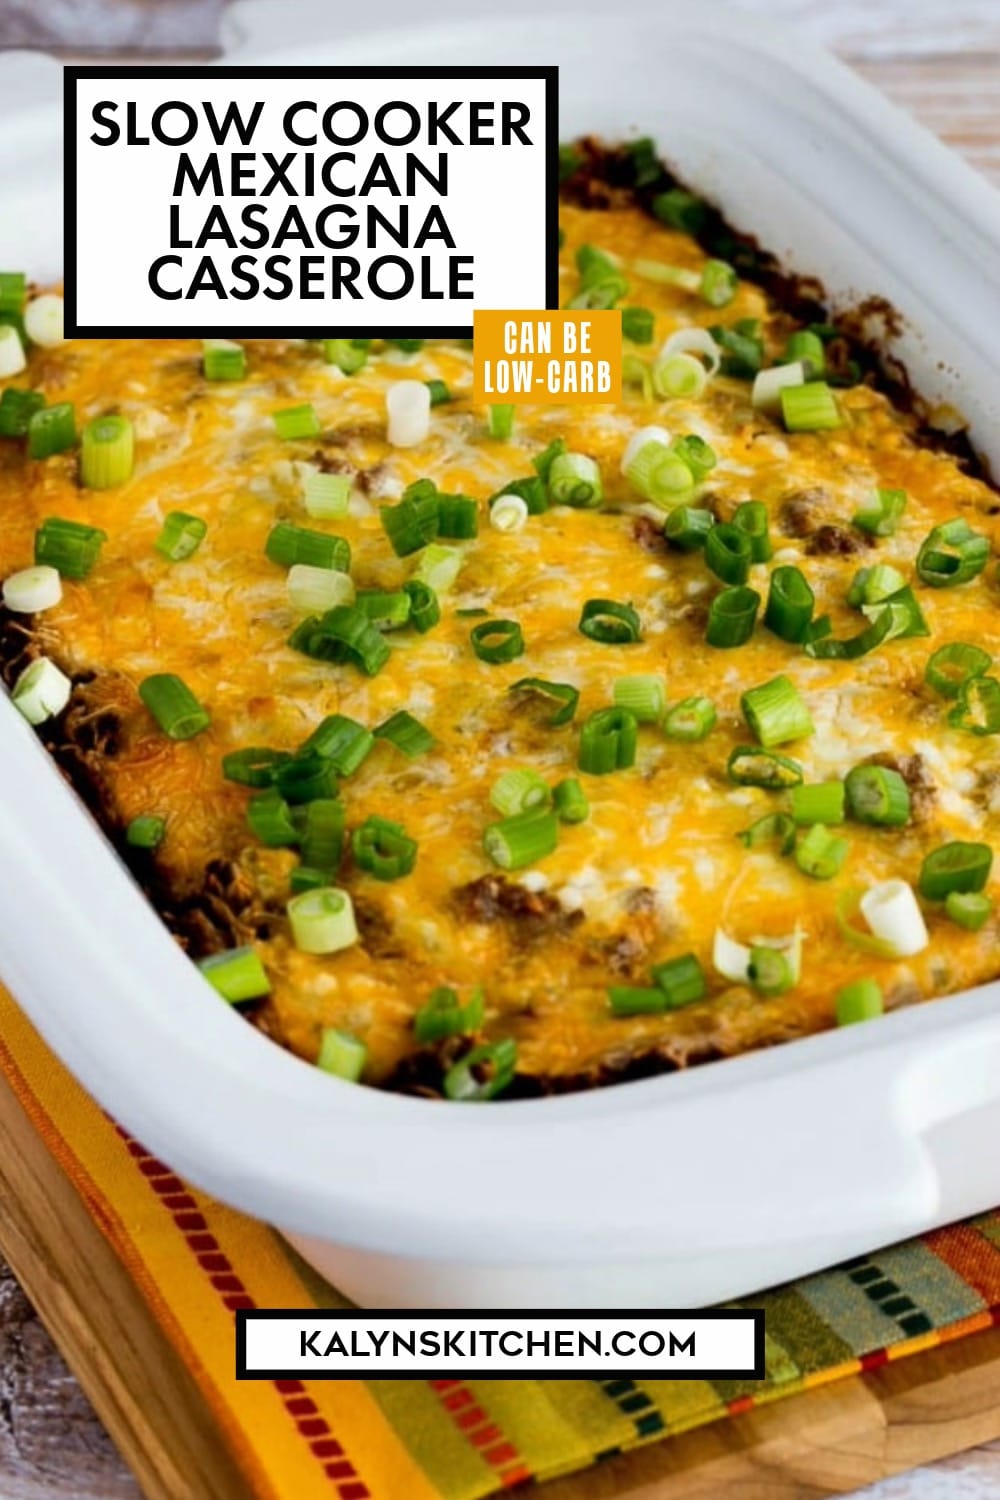 Pinterest image of Slow Cooker Mexican Lasagna Casserole